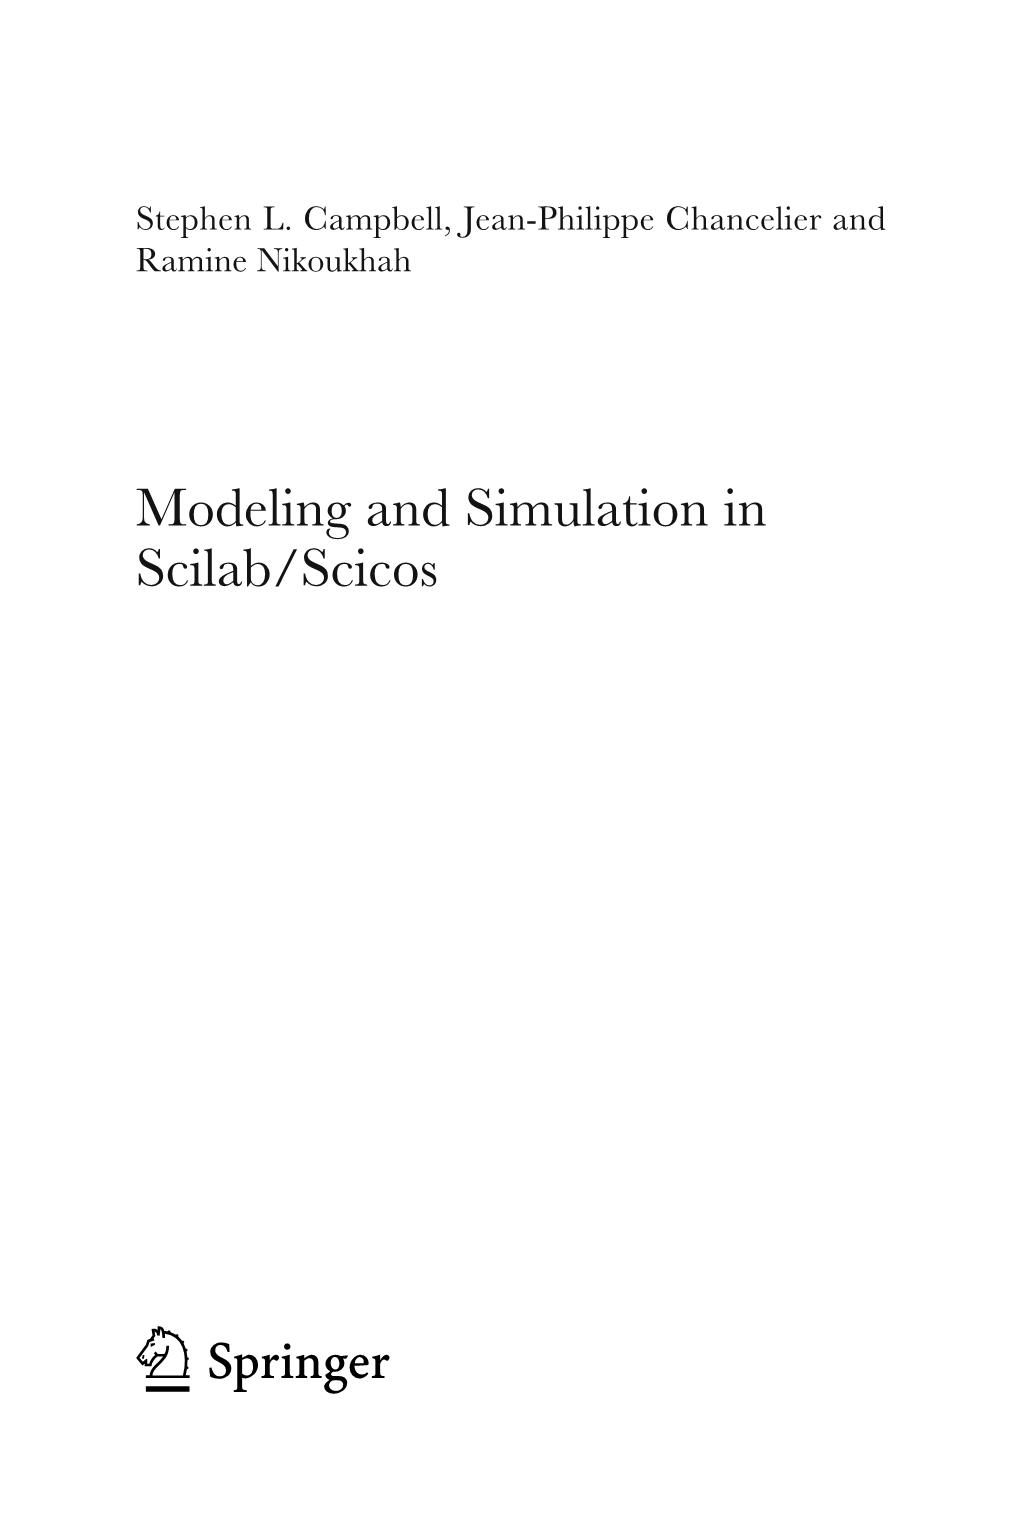 Modeling and Simulation in Scilab/Scicos Mathematics Subject Classification (2000): 01-01, 04-01, 11 Axx, 26-01